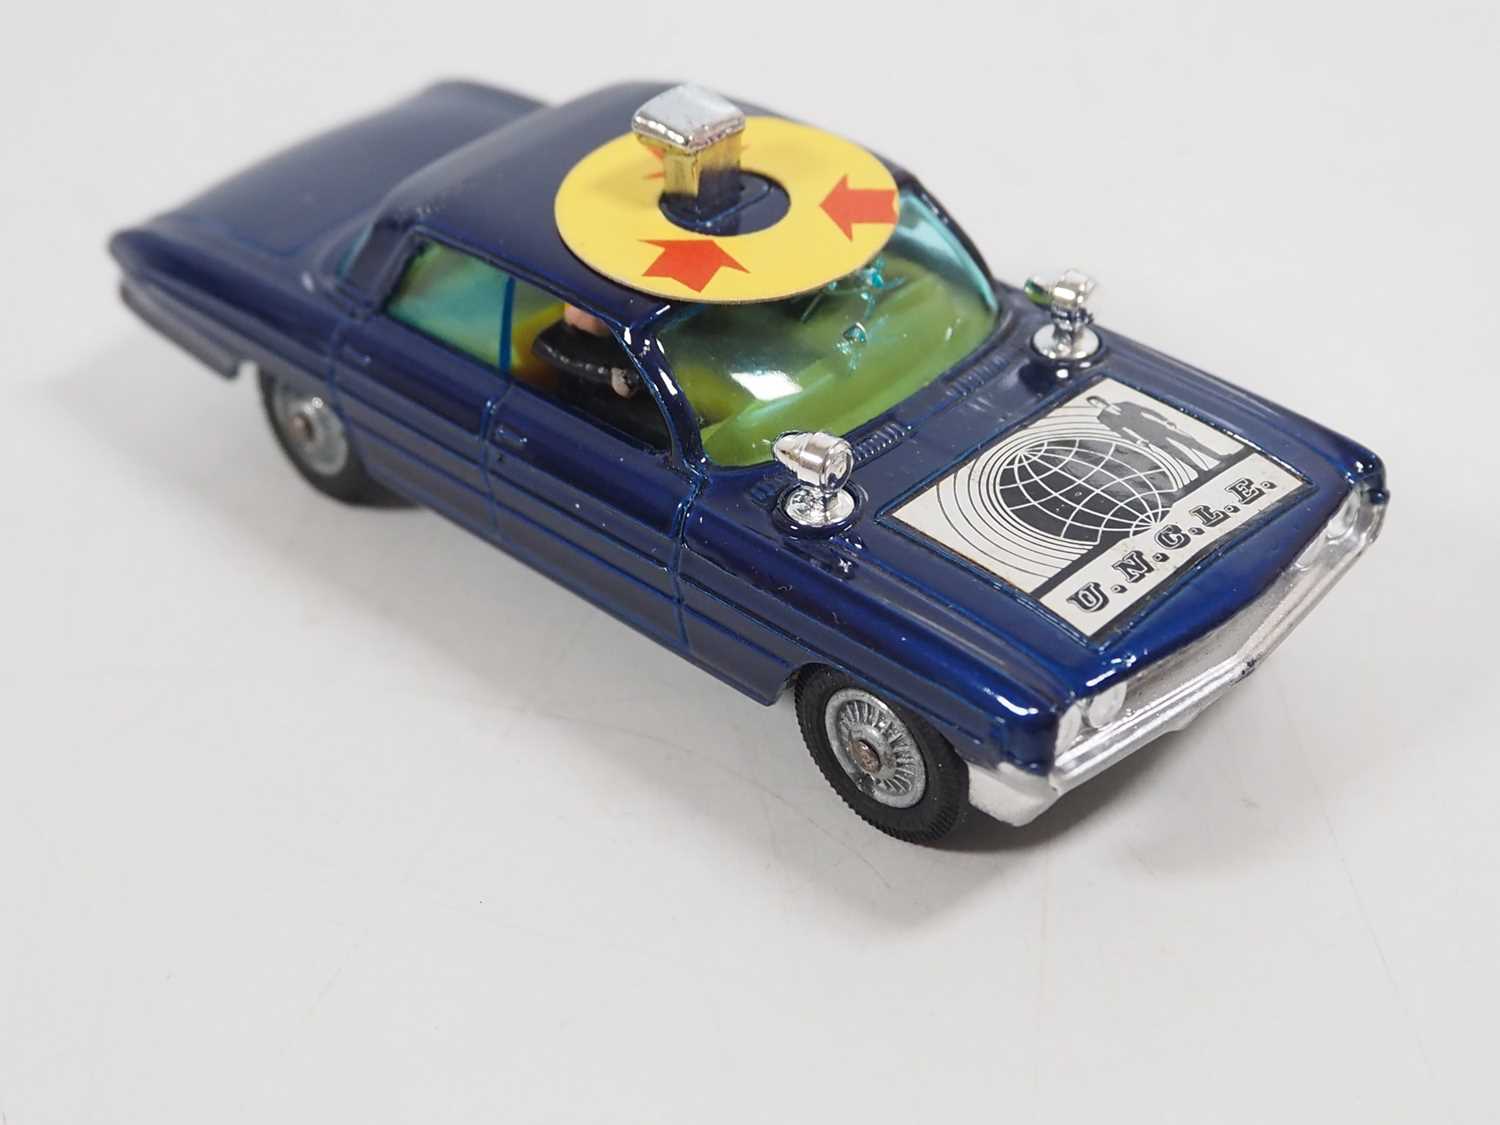 A CORGI 497 diecast Thrush-Buster Oldsmobile from 'The Man From U.N.C.L.E' - blue metallic version - - Image 4 of 9